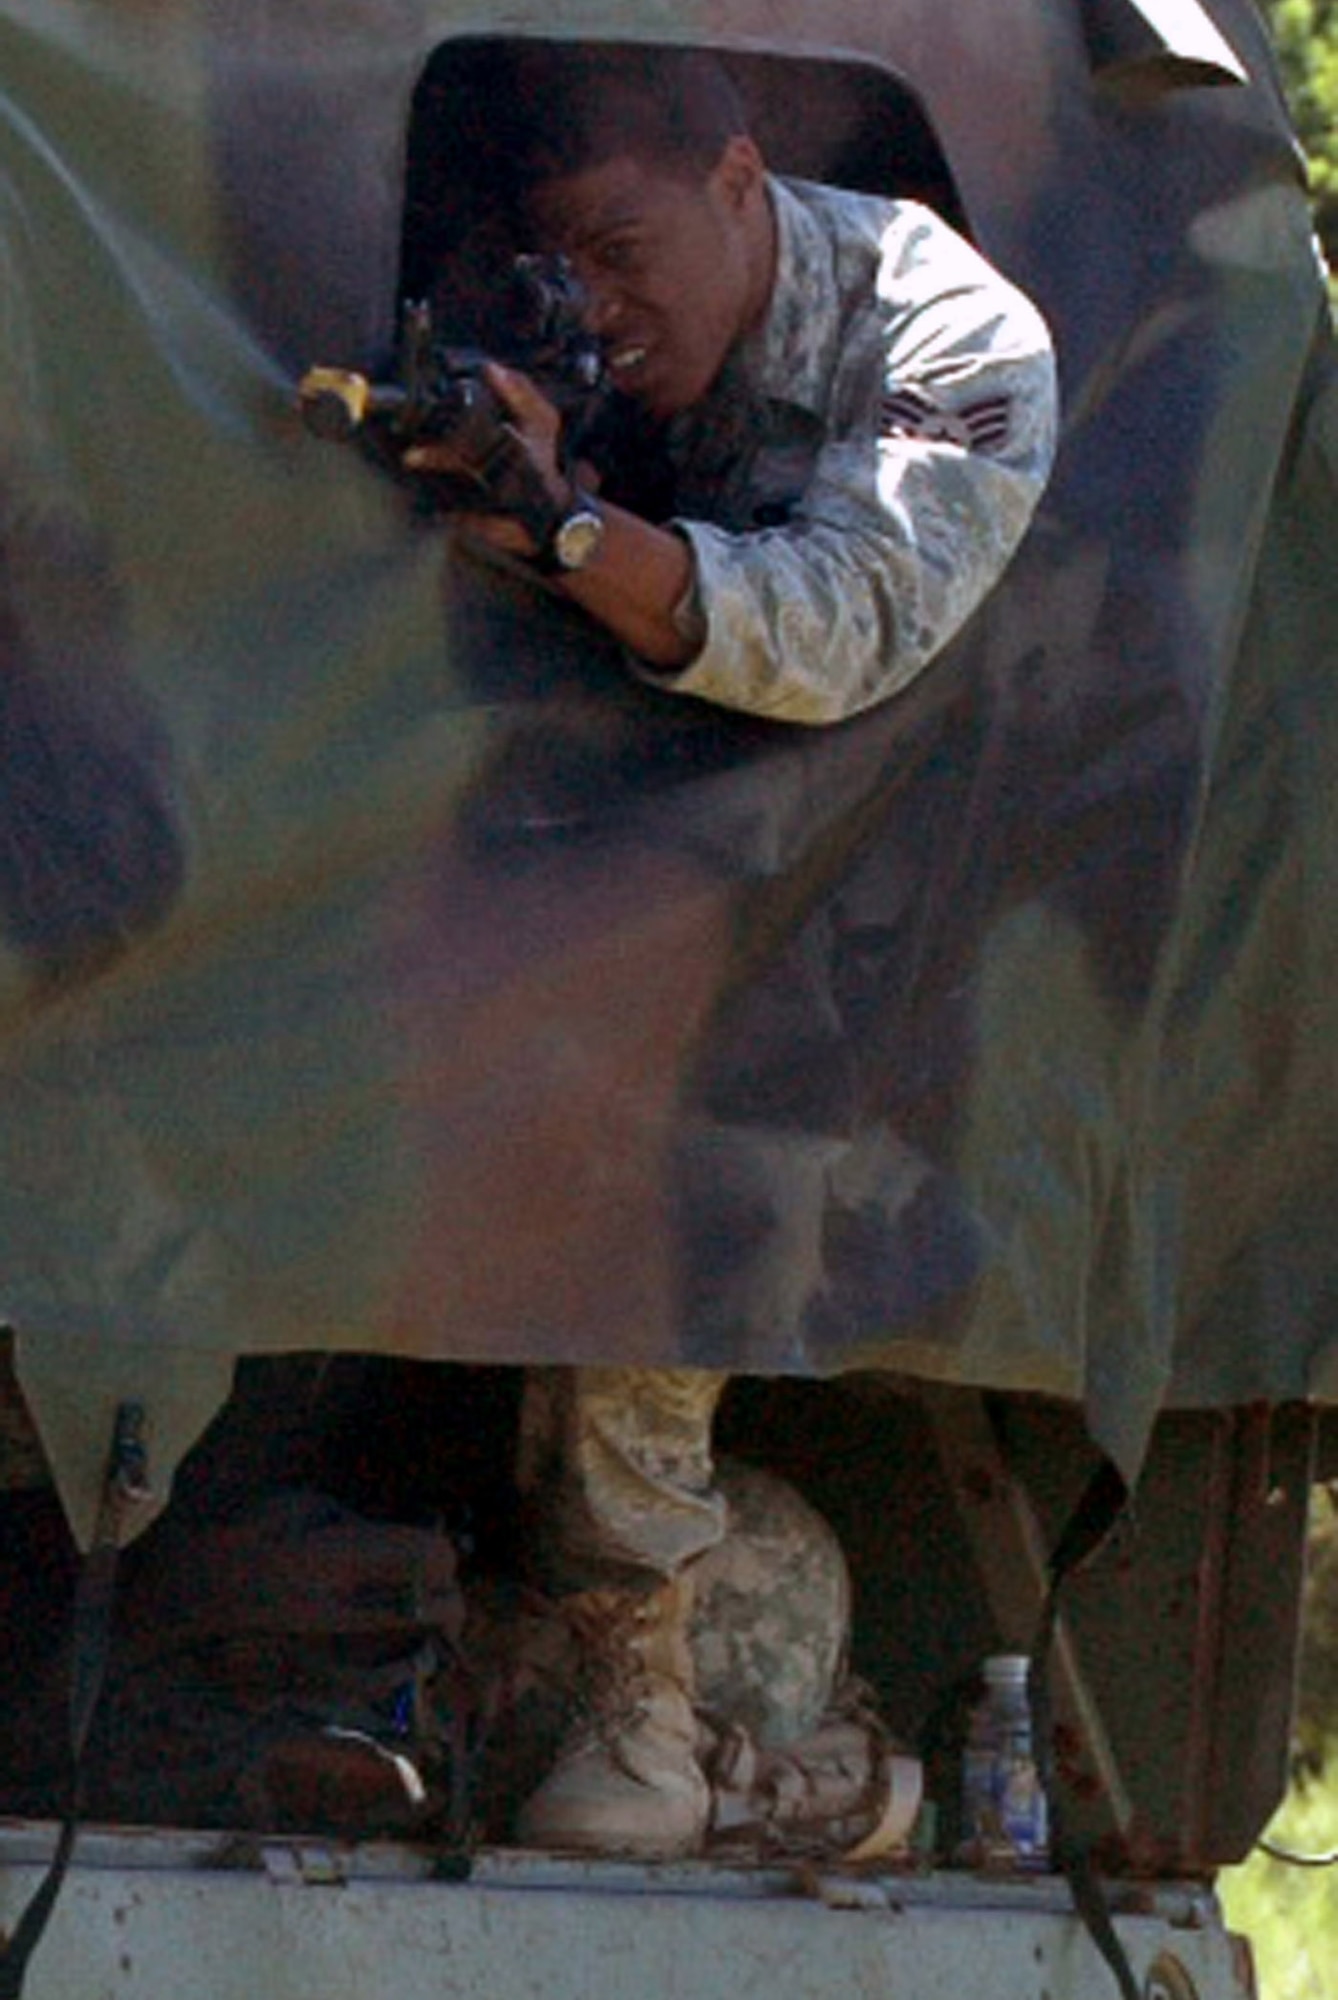 A student in the Air Force Phoenix Raven Course fires back at an "aggressor" during an evaluation session in the course on a Fort Dix, N.J., range Aug. 20, 2008.  The course, taught by the U.S. Air Force Expeditionary Center's 421st Combat Training Squadron, trains security forces Airmen to become Ravens where they specialize in protecting Air Force aircraft in austere environments.  (U.S. Air Force Photo/Tech. Sgt. Scott T. Sturkol)